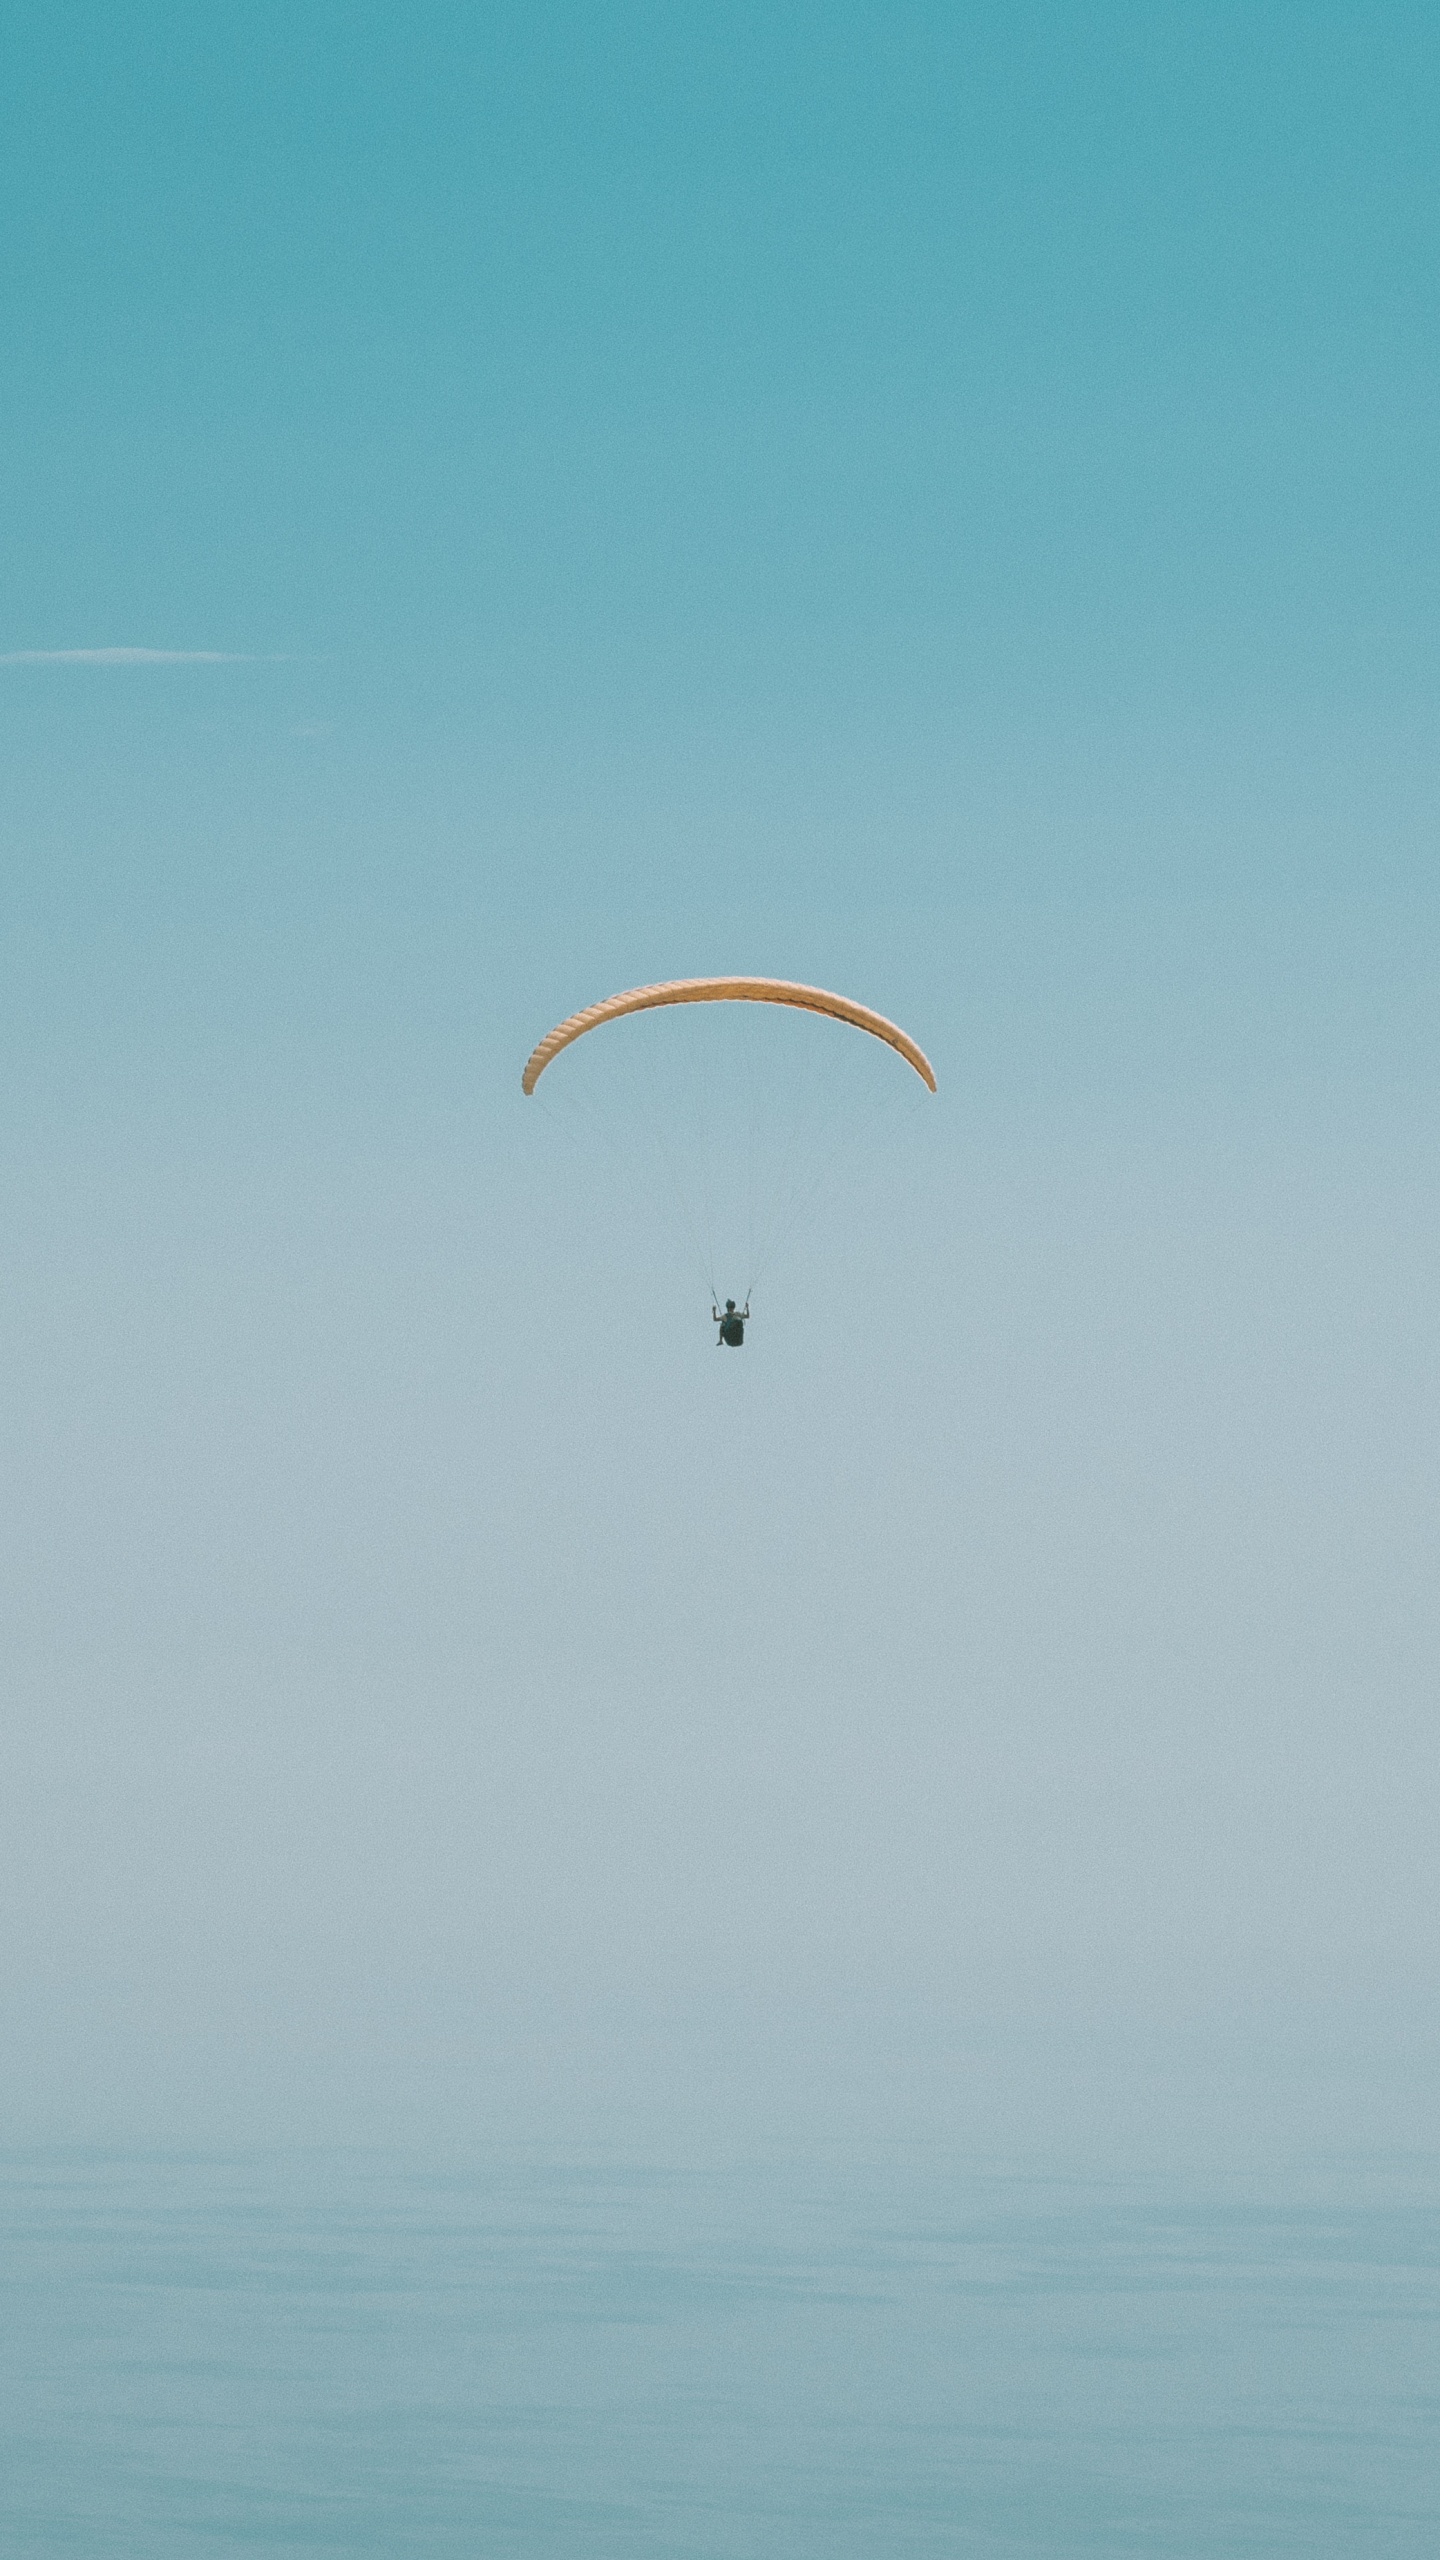 Person in Parachute Under Blue Sky During Daytime. Wallpaper in 1440x2560 Resolution